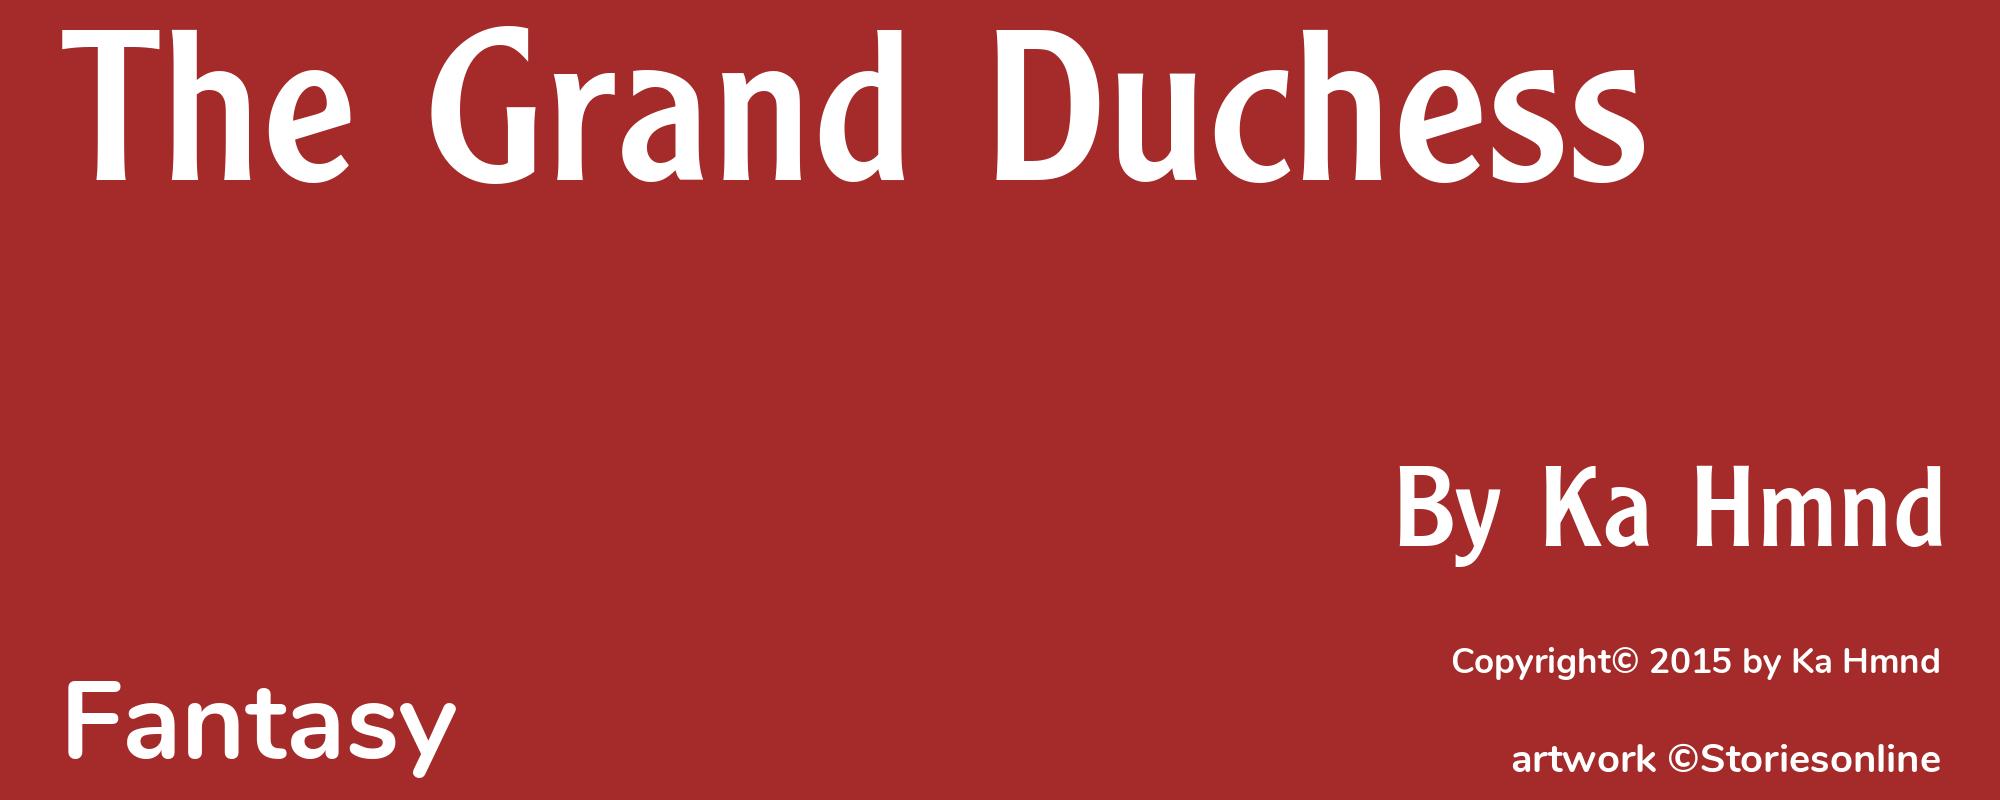 The Grand Duchess - Cover